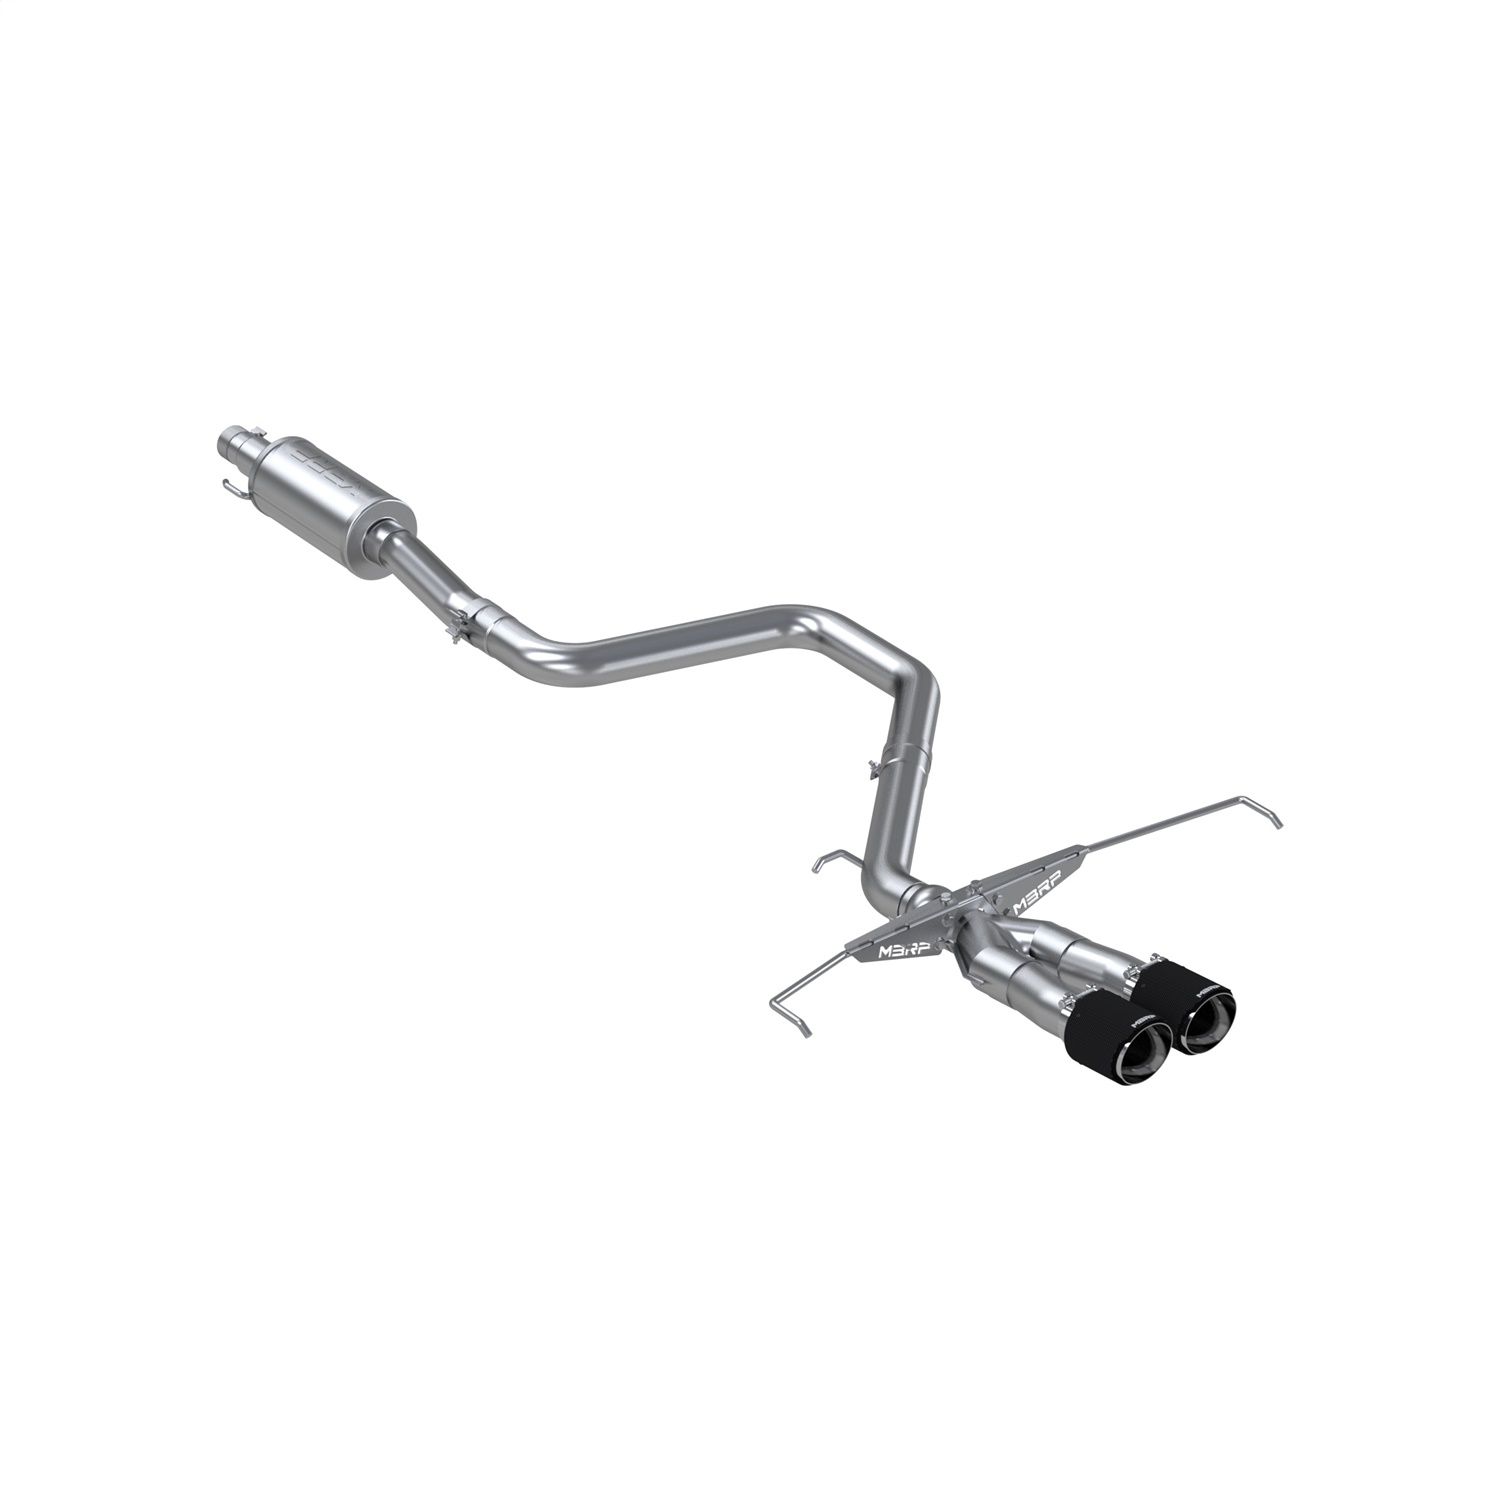 MBRP Exhaust S47053CF Armor Pro Cat Back Exhaust System Fits 19-21 Veloster